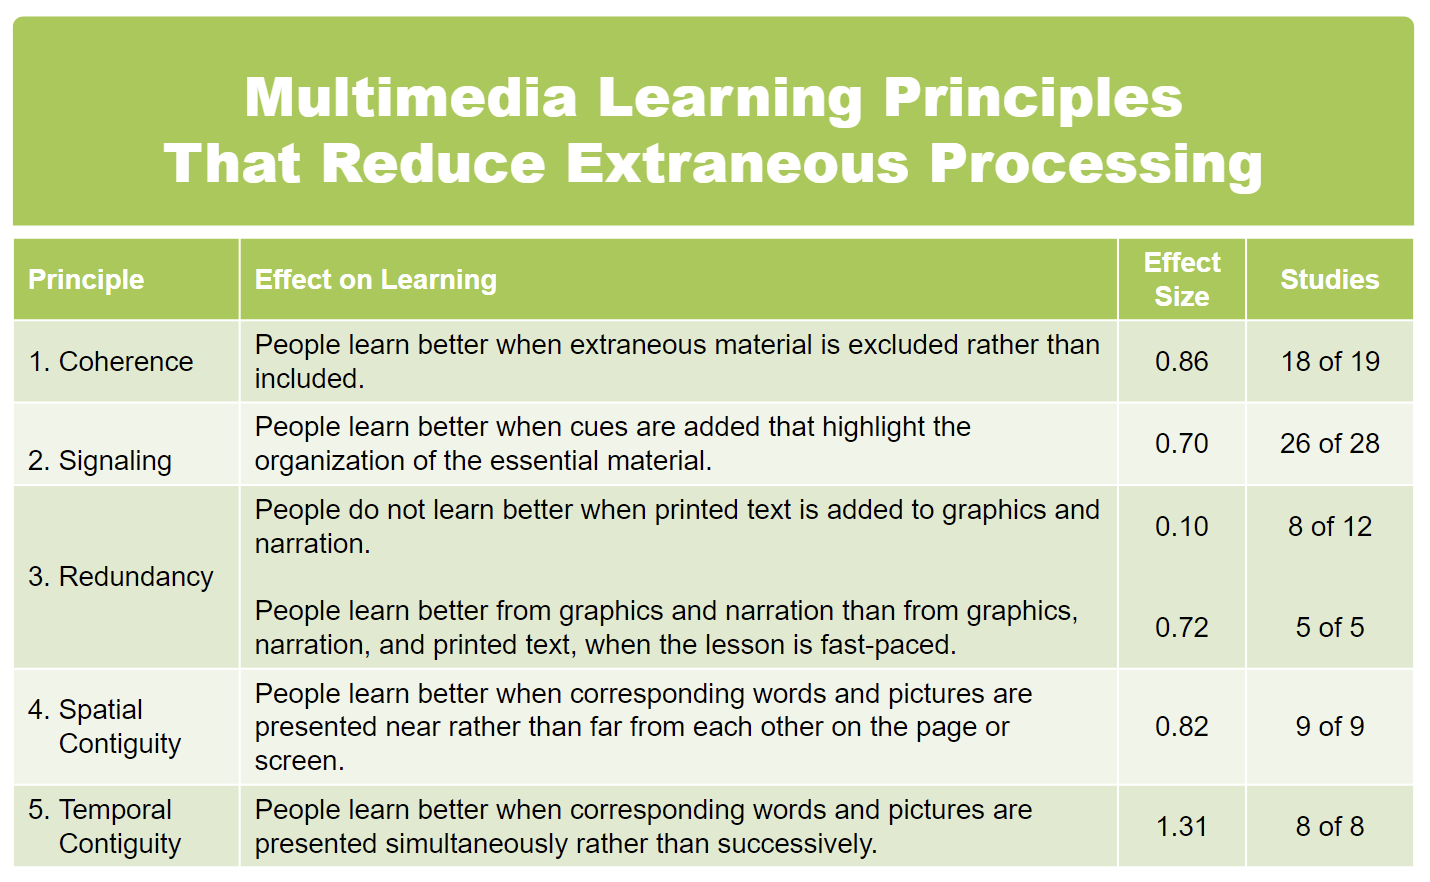 Multimedia Principles to Reduce Extraneous Processing